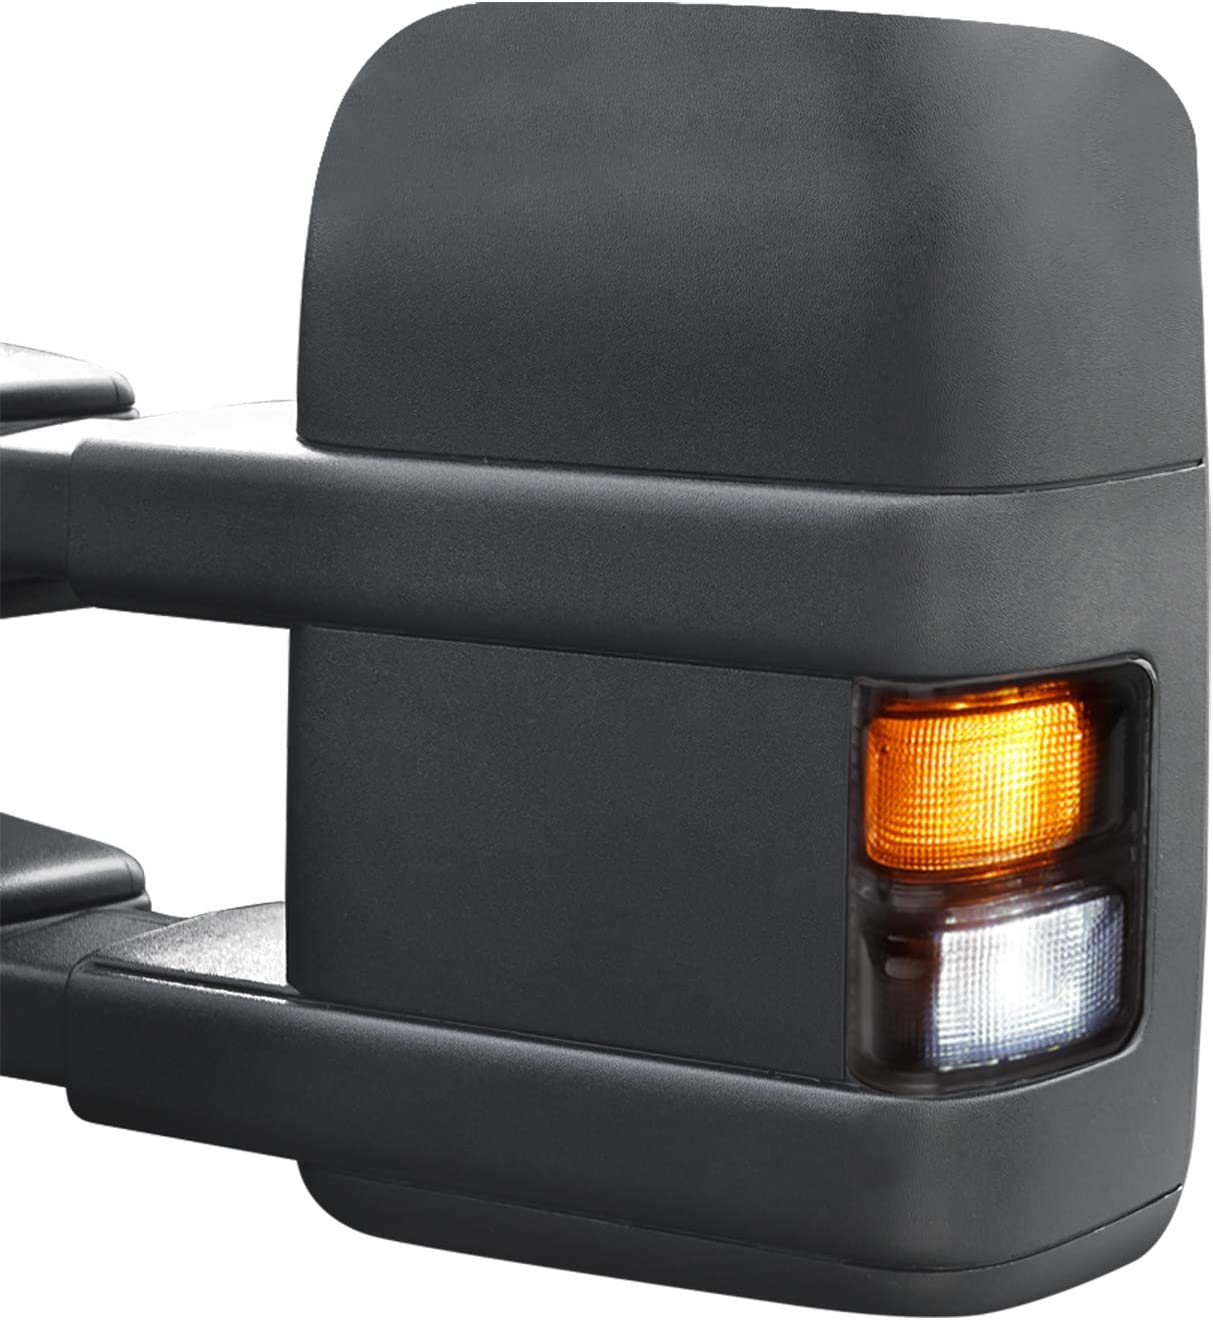 HERCOO Amber Side Mirror Marker Lights Lens w/LED Compatible with 2008-2016 F250 F350 F450 Super Duty Turn Signal Aftermarket Replacement, Qty: 2, Amber & White